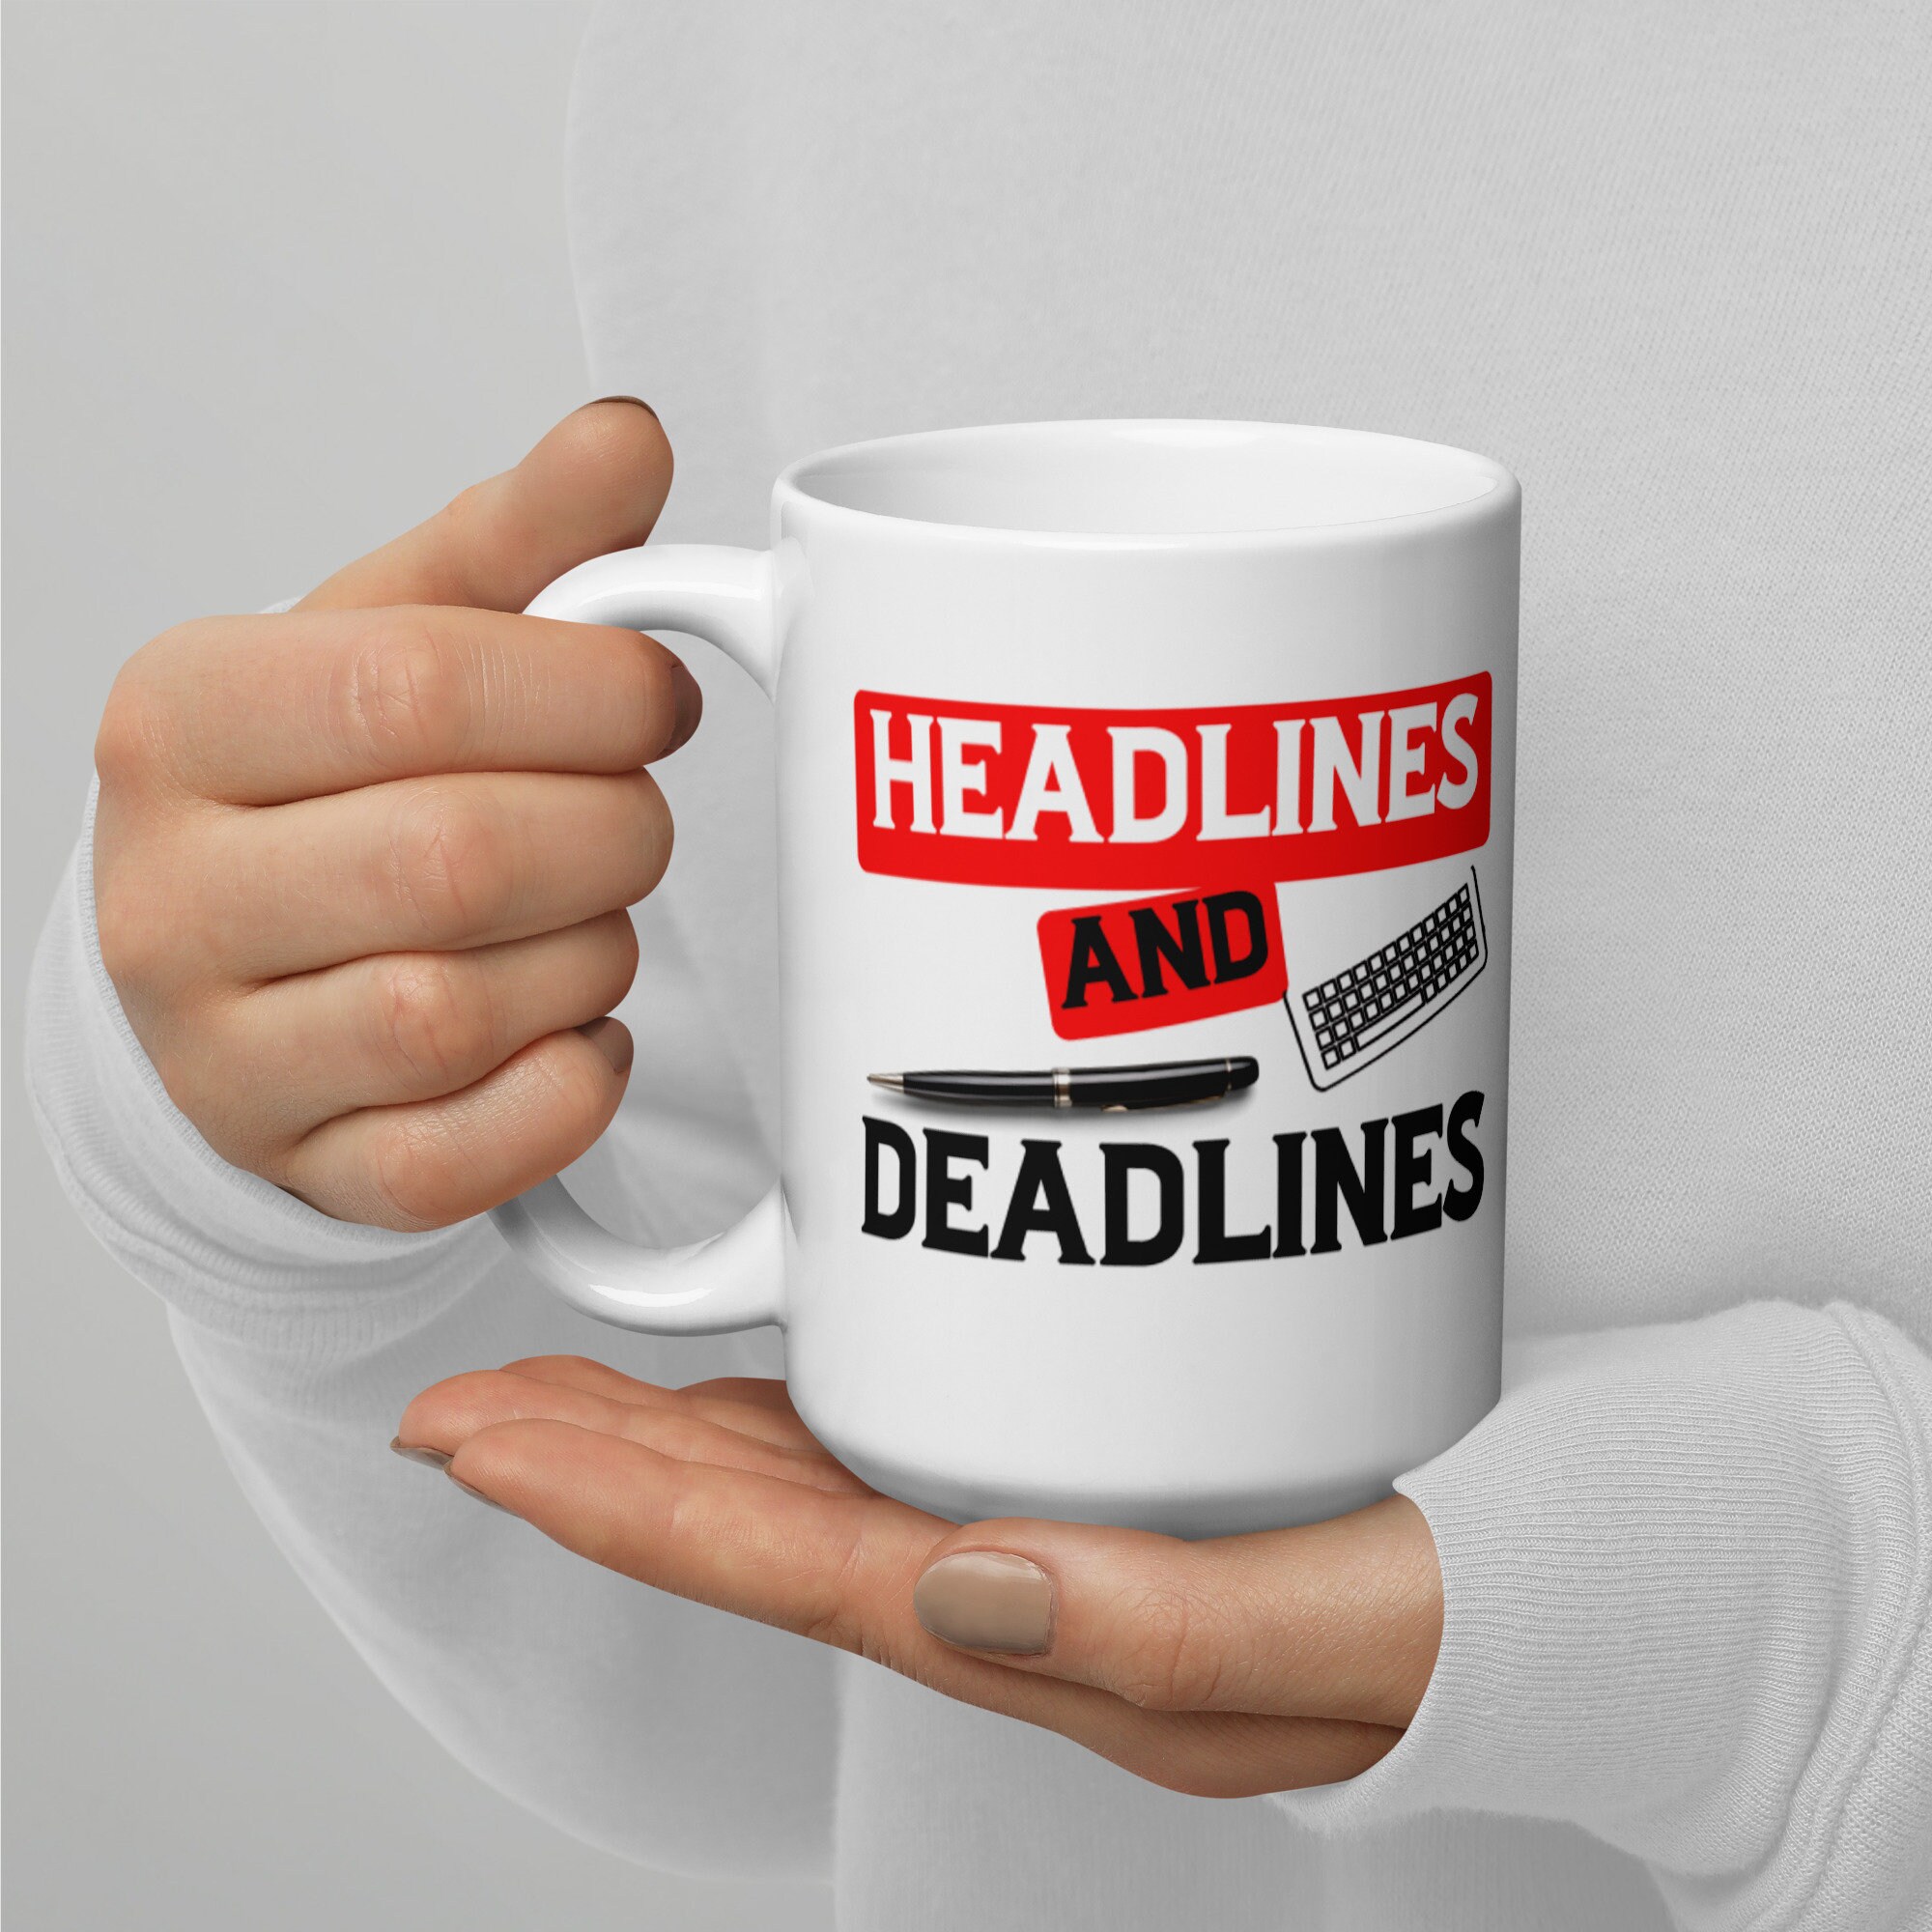 Journalist Travel Coffee Mug, News Reporter Stuff, Best Gifts Under 25  Dollars for Coworkers, Fun Inexpensive Gifts for News Reporters 